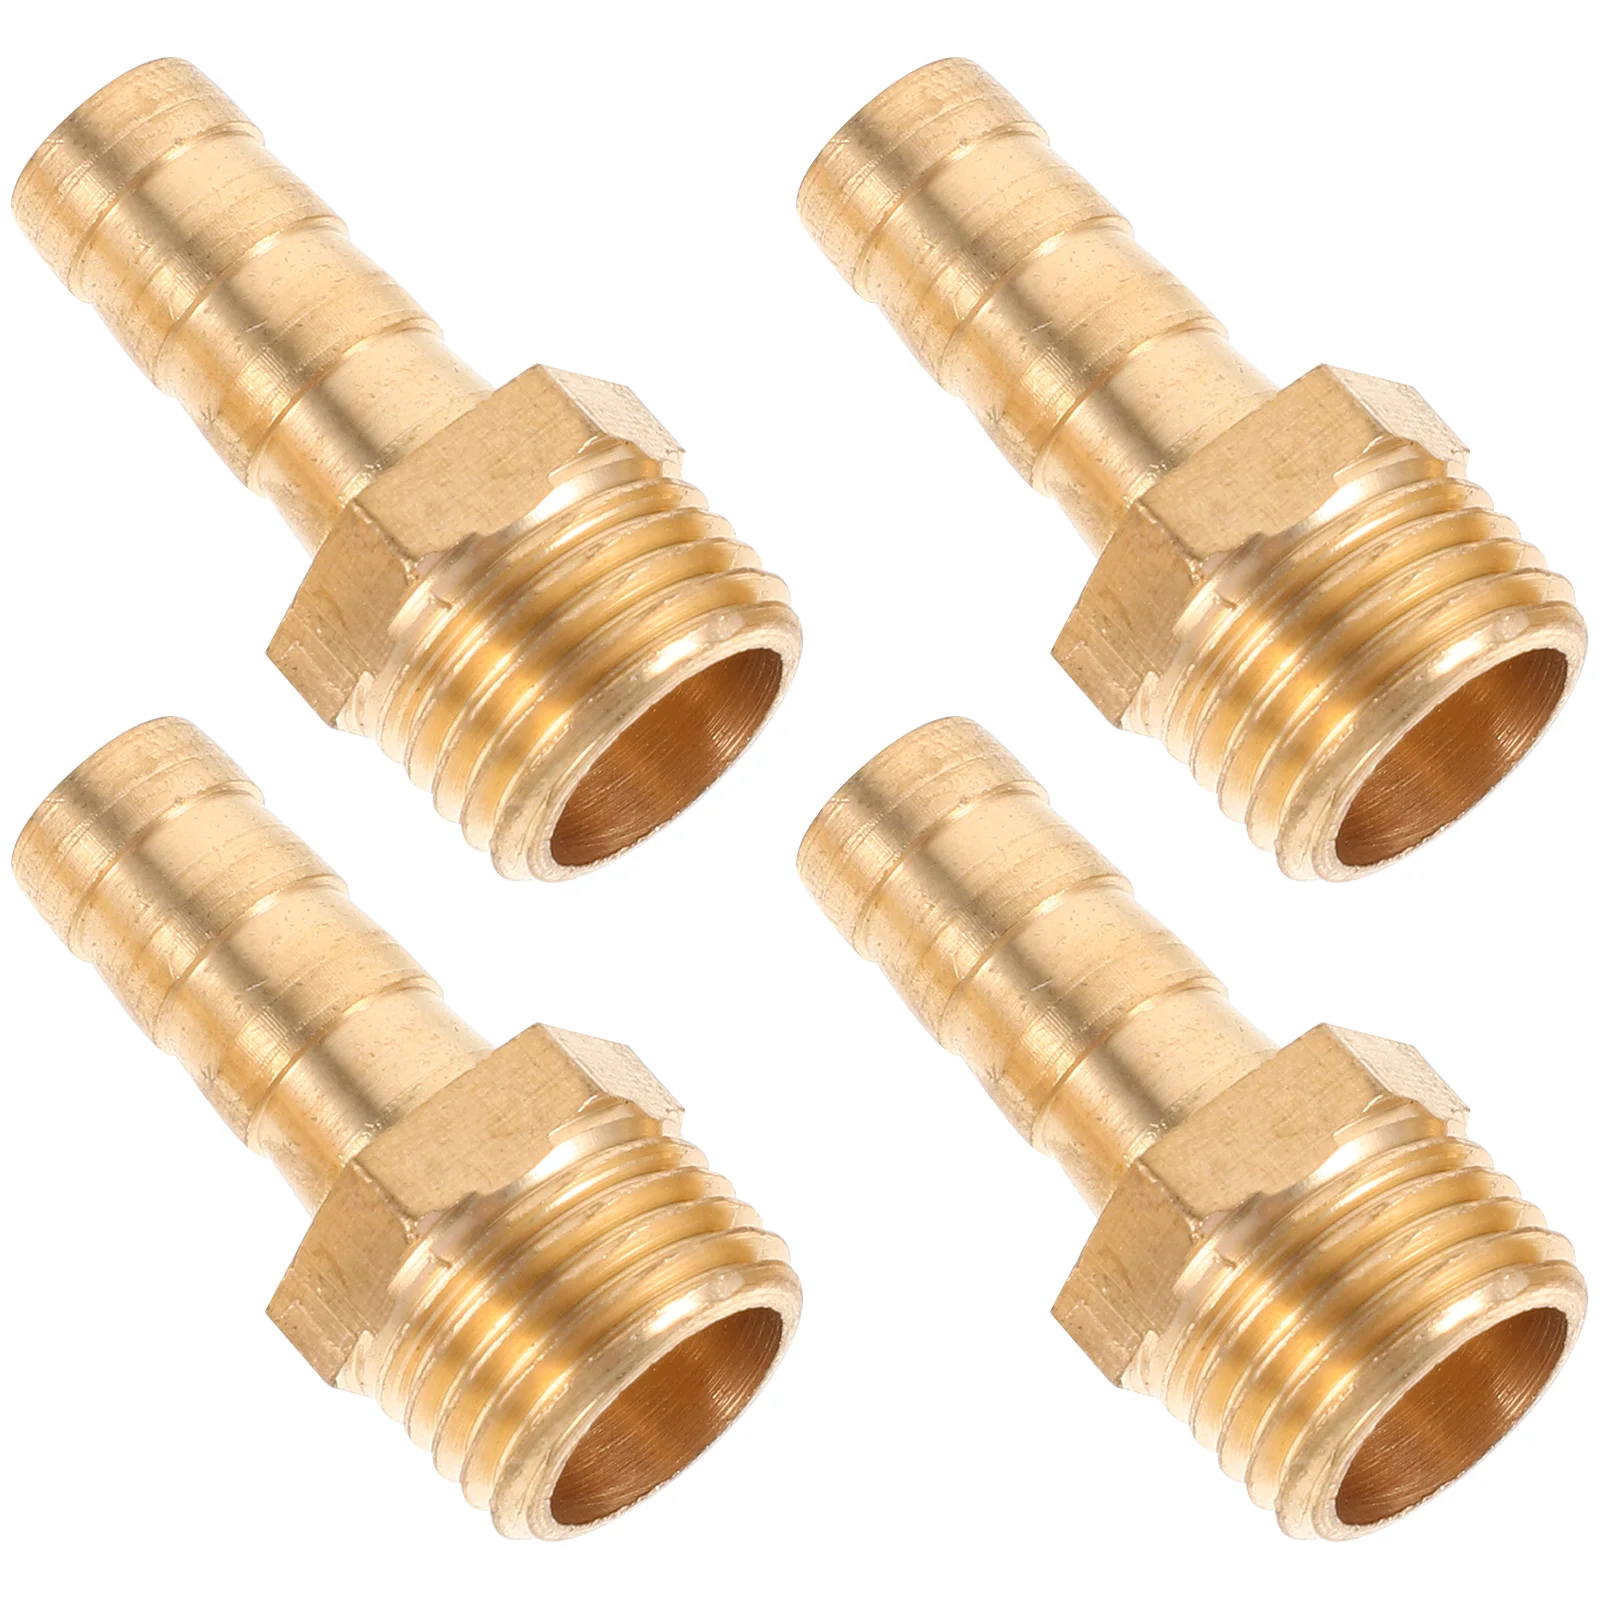 

4 Pcs Brass Hose Barb Tee 1/4" X 1/4"x T-Connector 3-Way Air 5-Pack Pipe Fittings Practical Copper